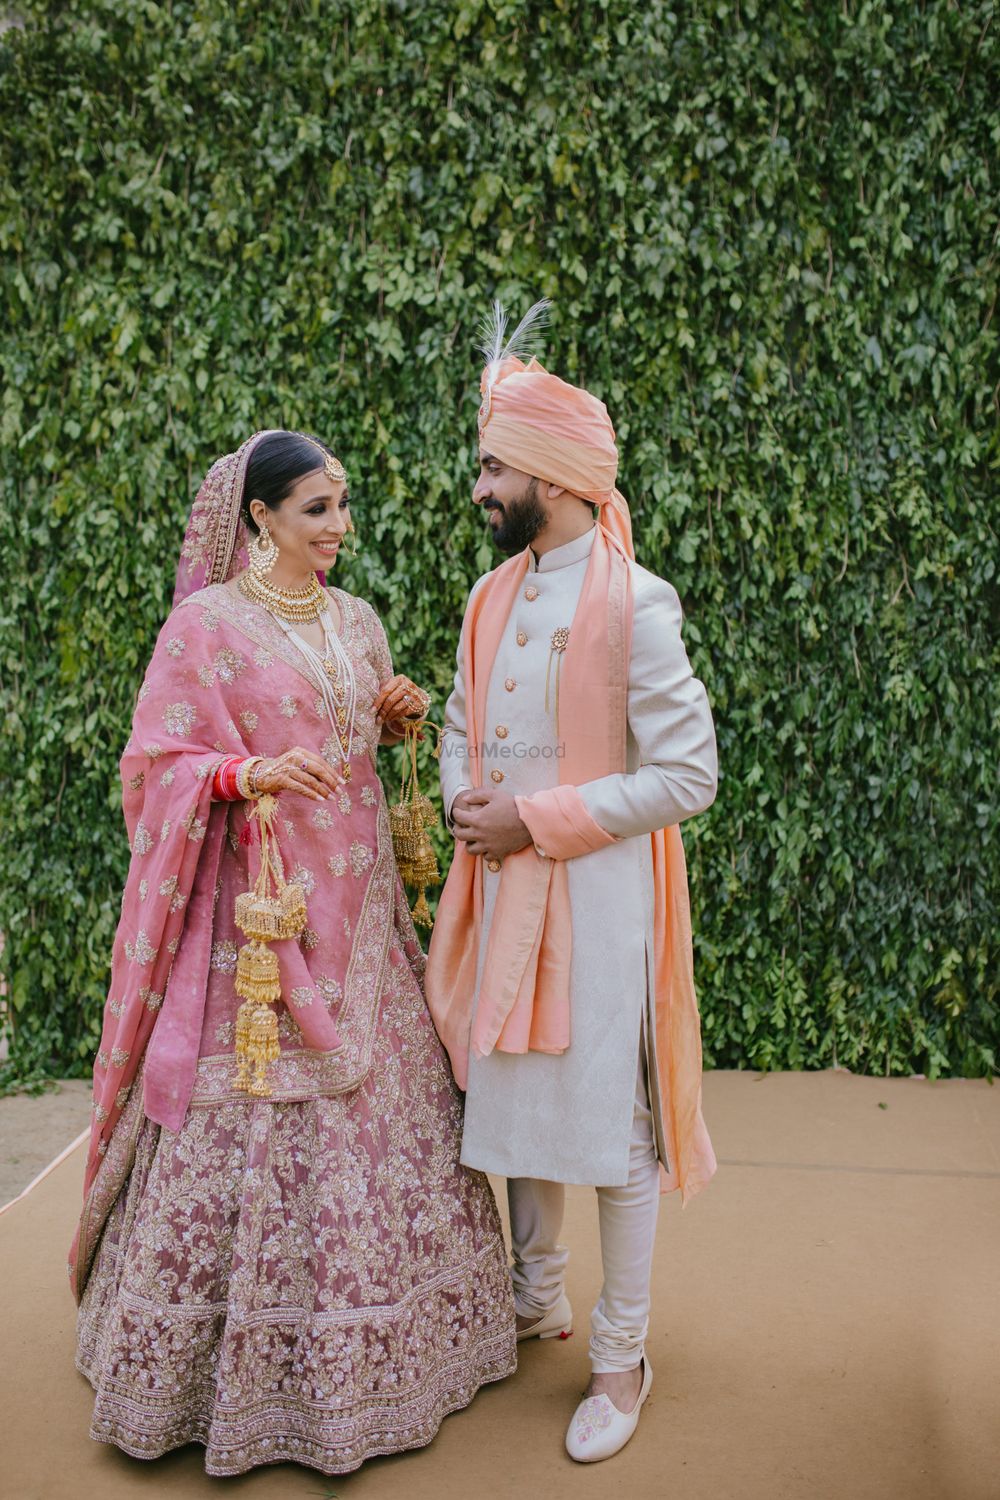 Photo of A bride and groom in coordinated clothes for the wedding